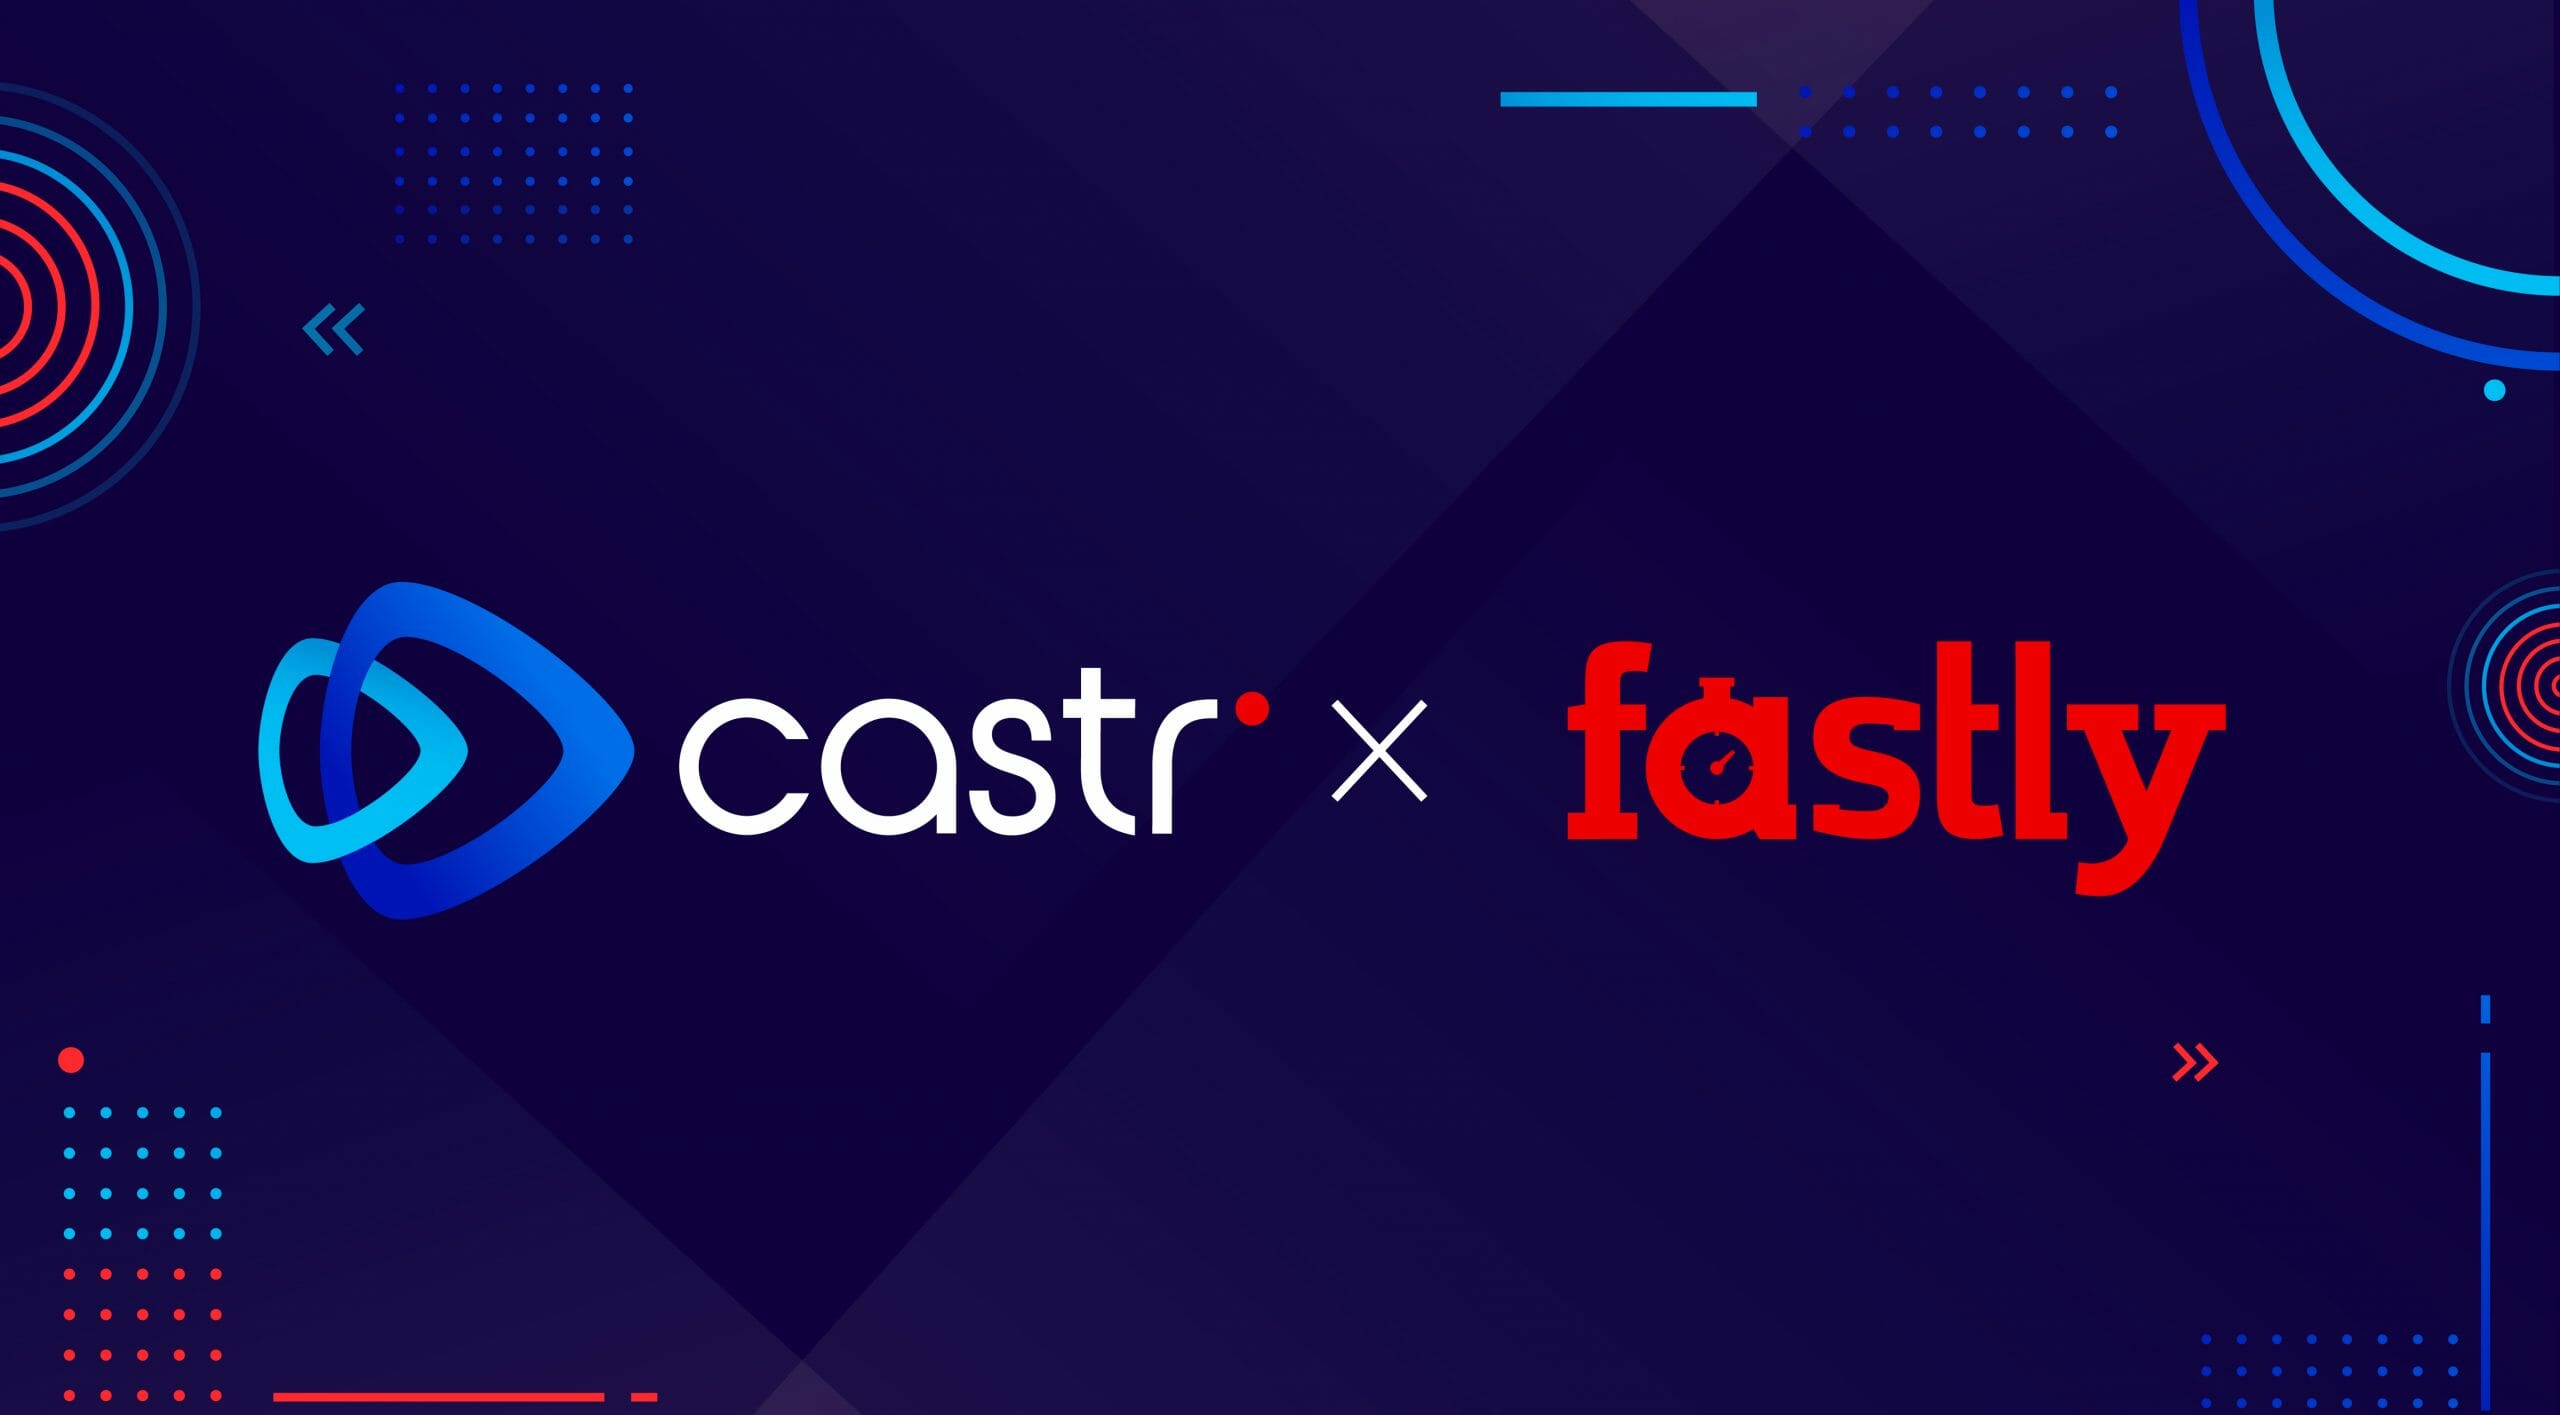 castr-fastly-technology-integration-featured-image